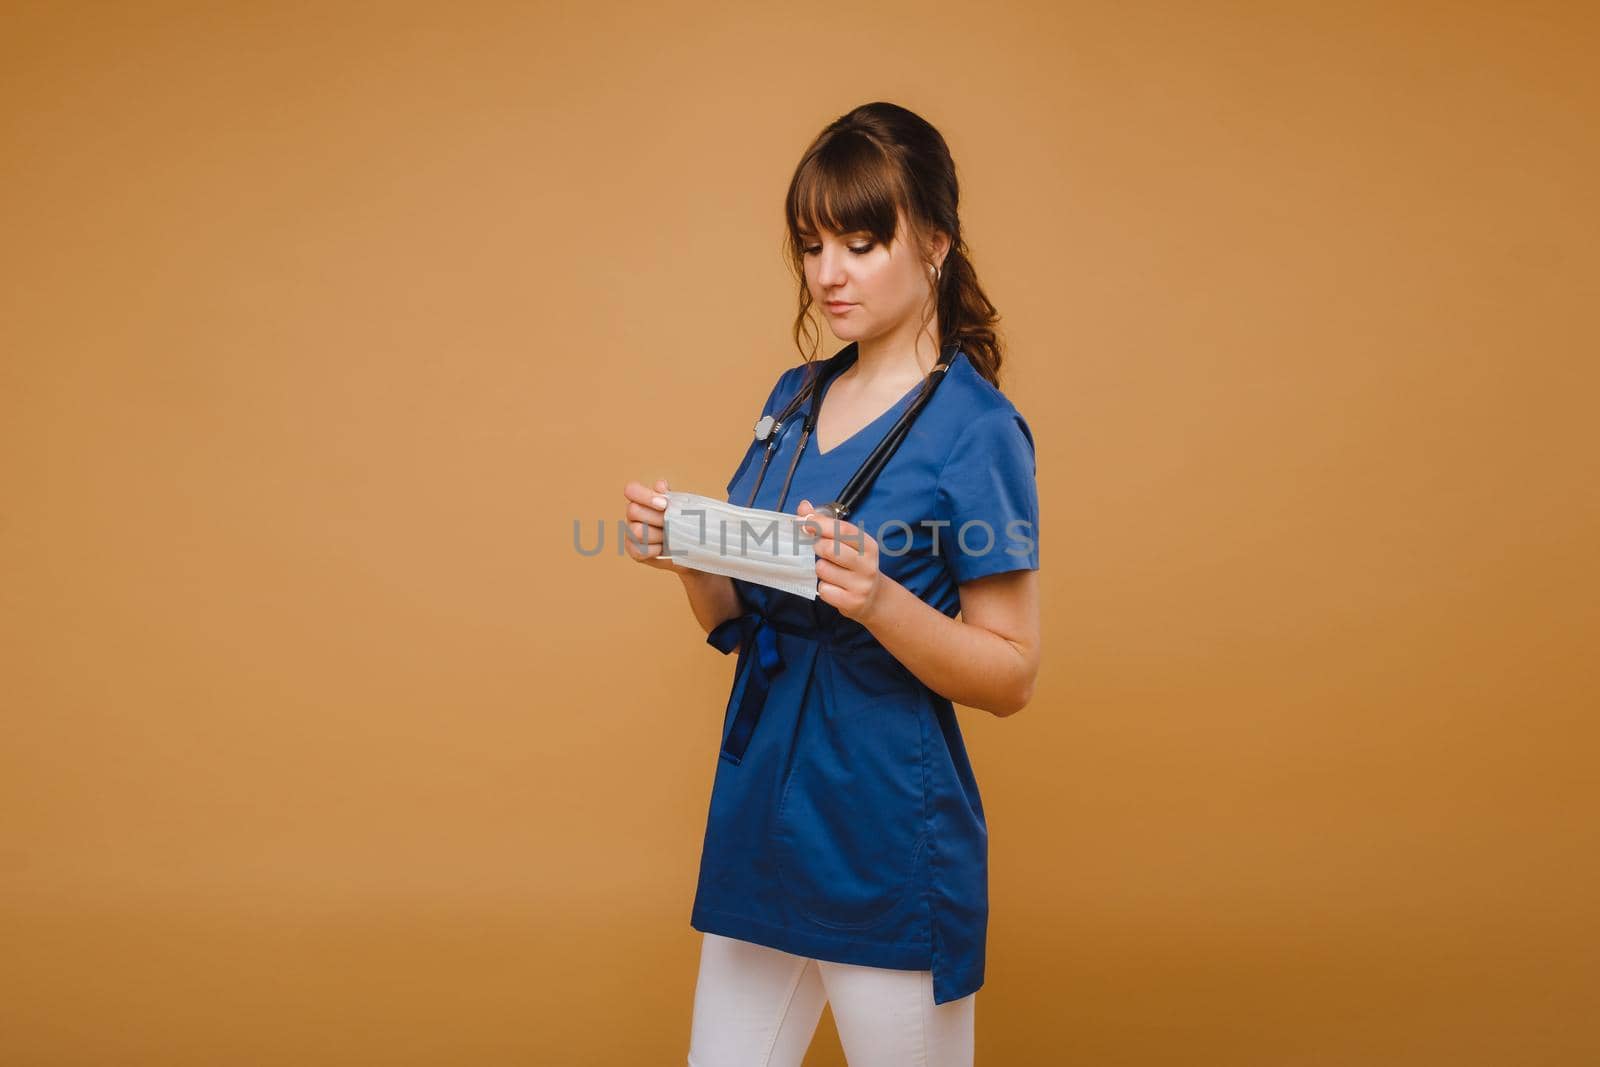 A girl doctor stands in a medical mask, isolated on a brown background by Lobachad